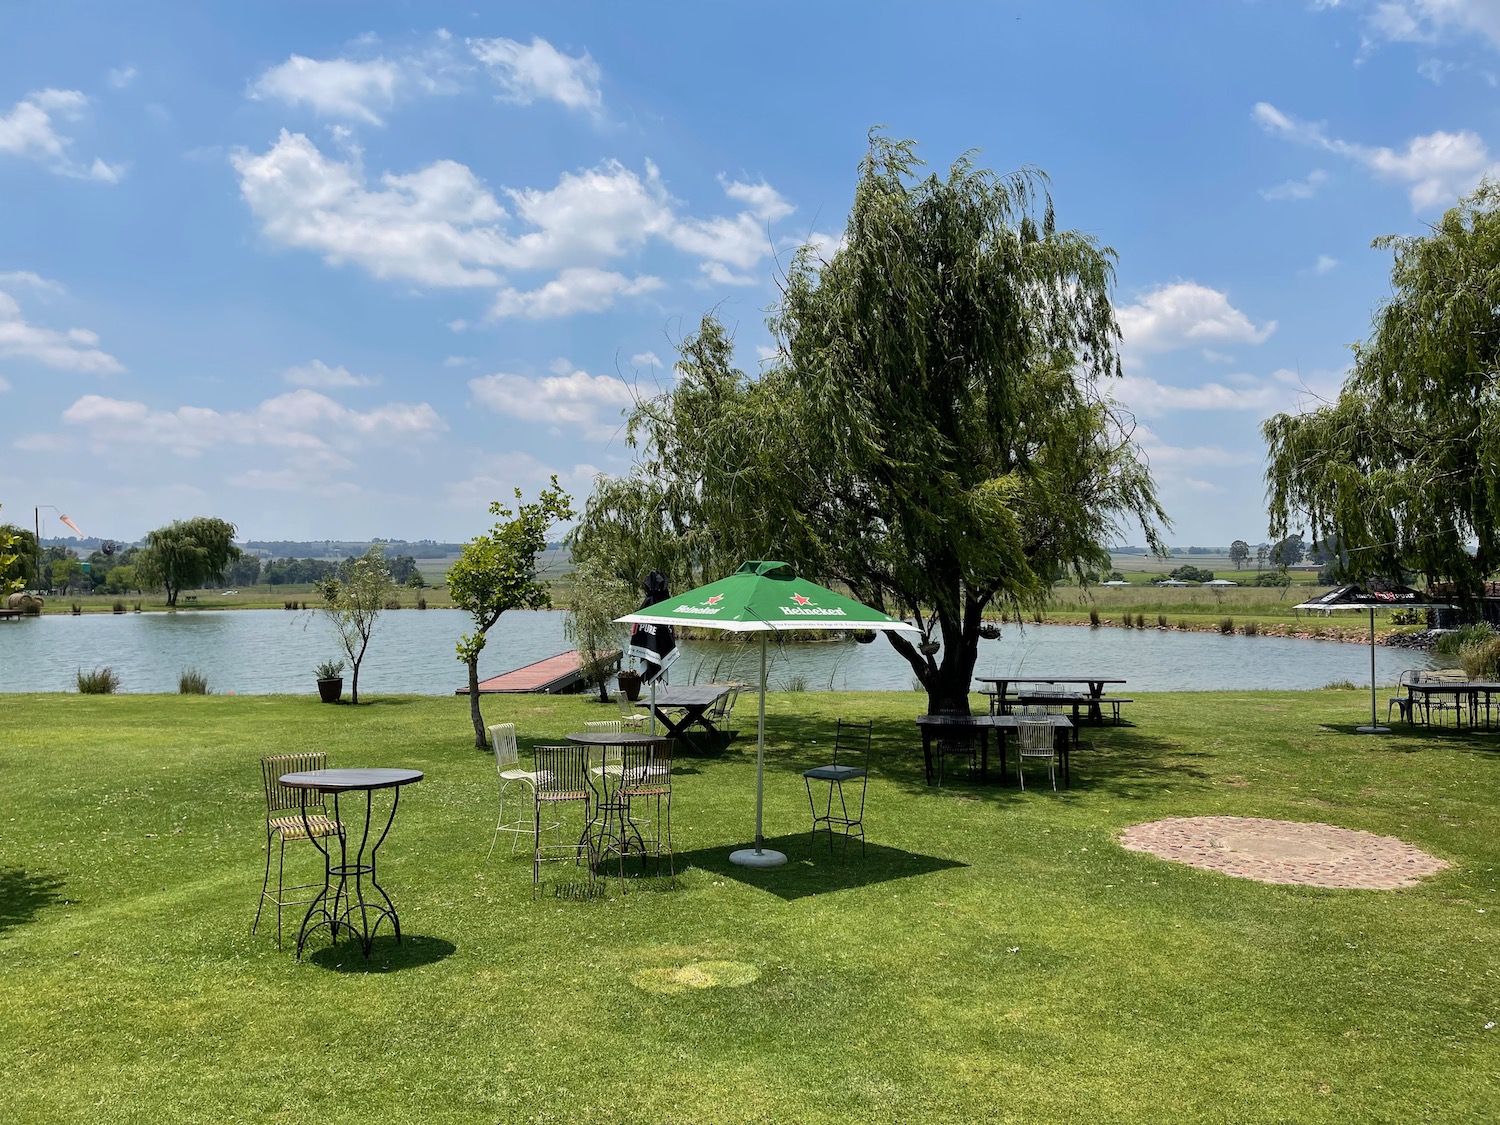 a picnic area with tables and chairs and a lake